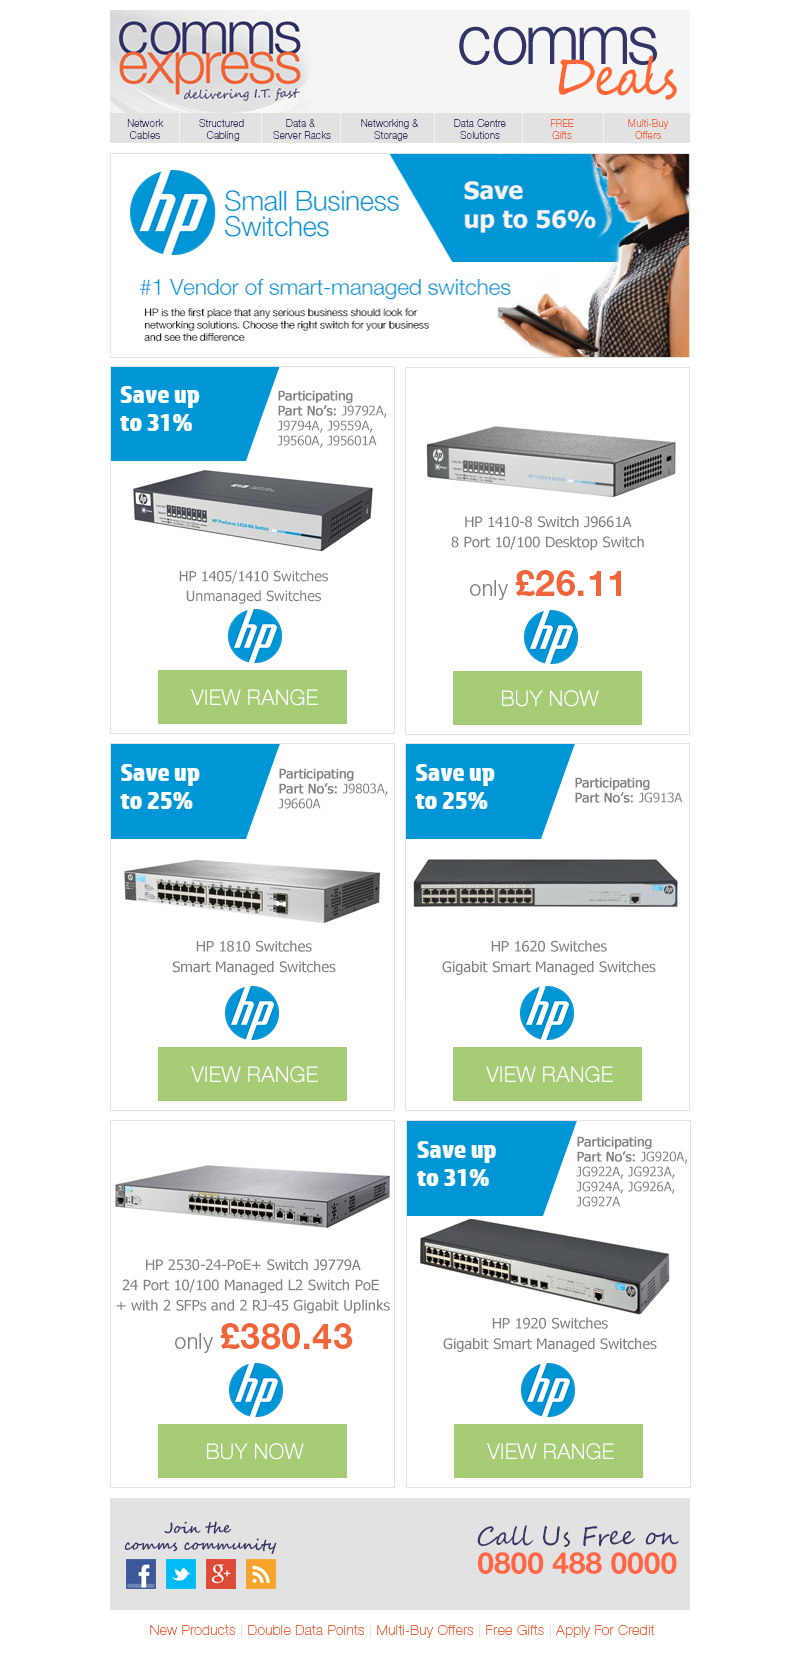 Save up to 56 Percent on HP Small Business Switches